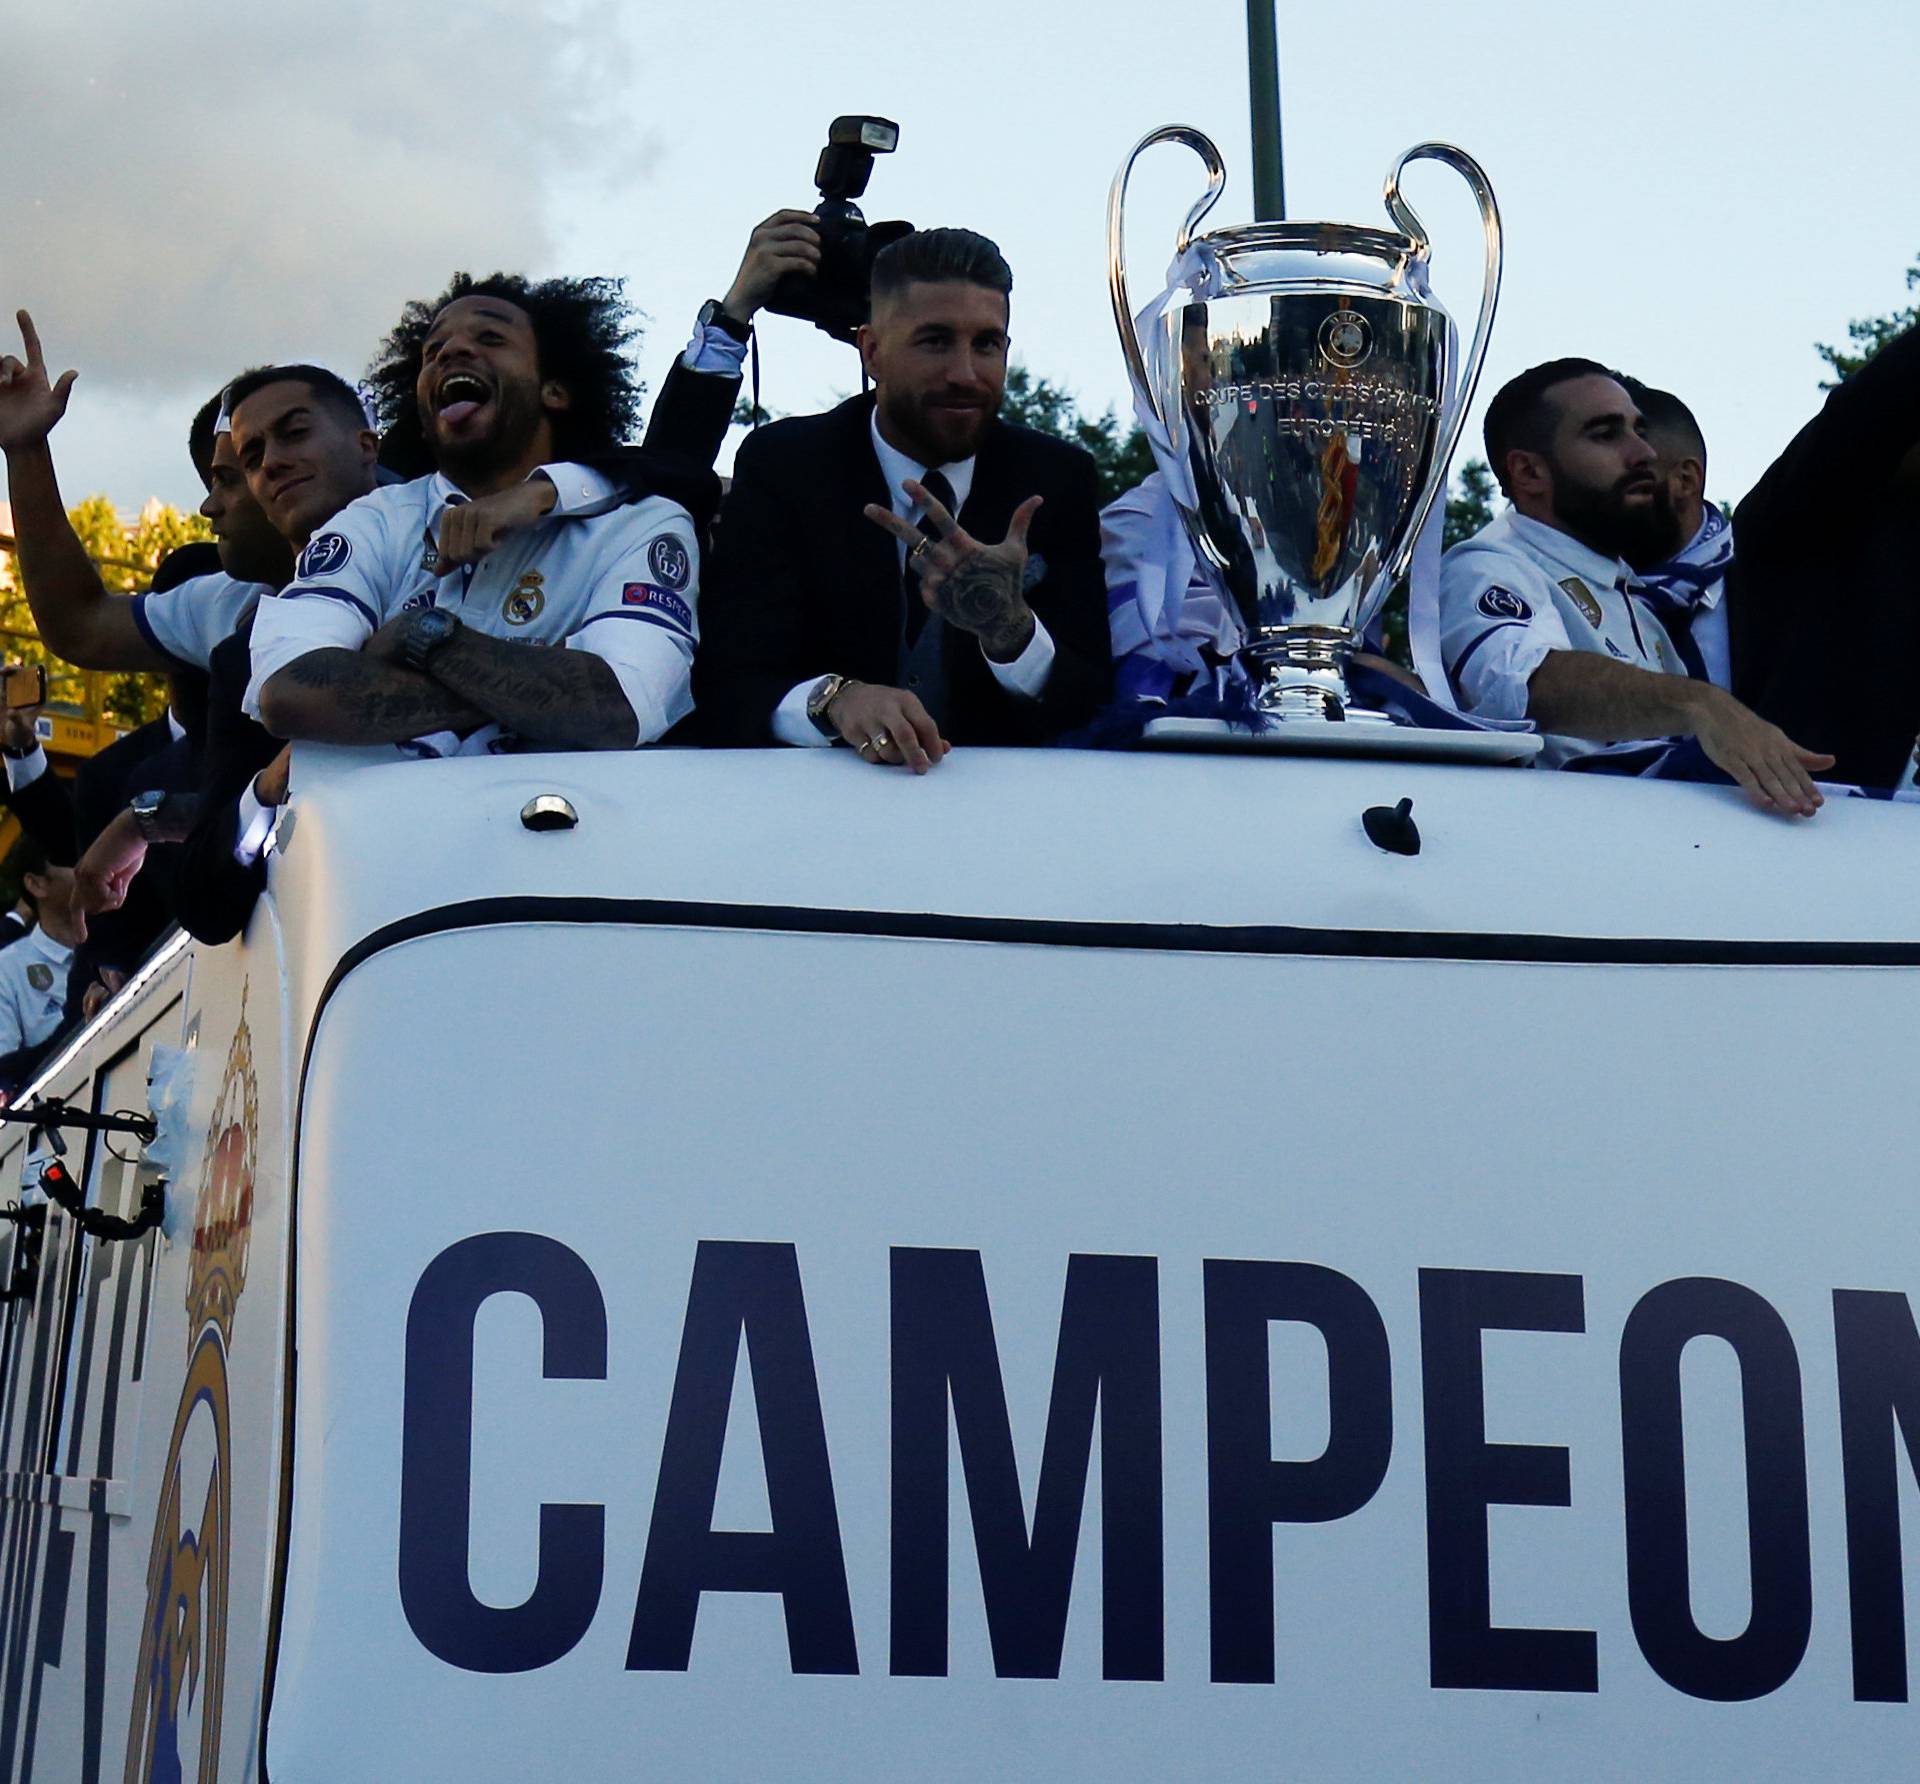 Real Madrid's players celebrate Champions League title at Cibeles Fountain in Madrid